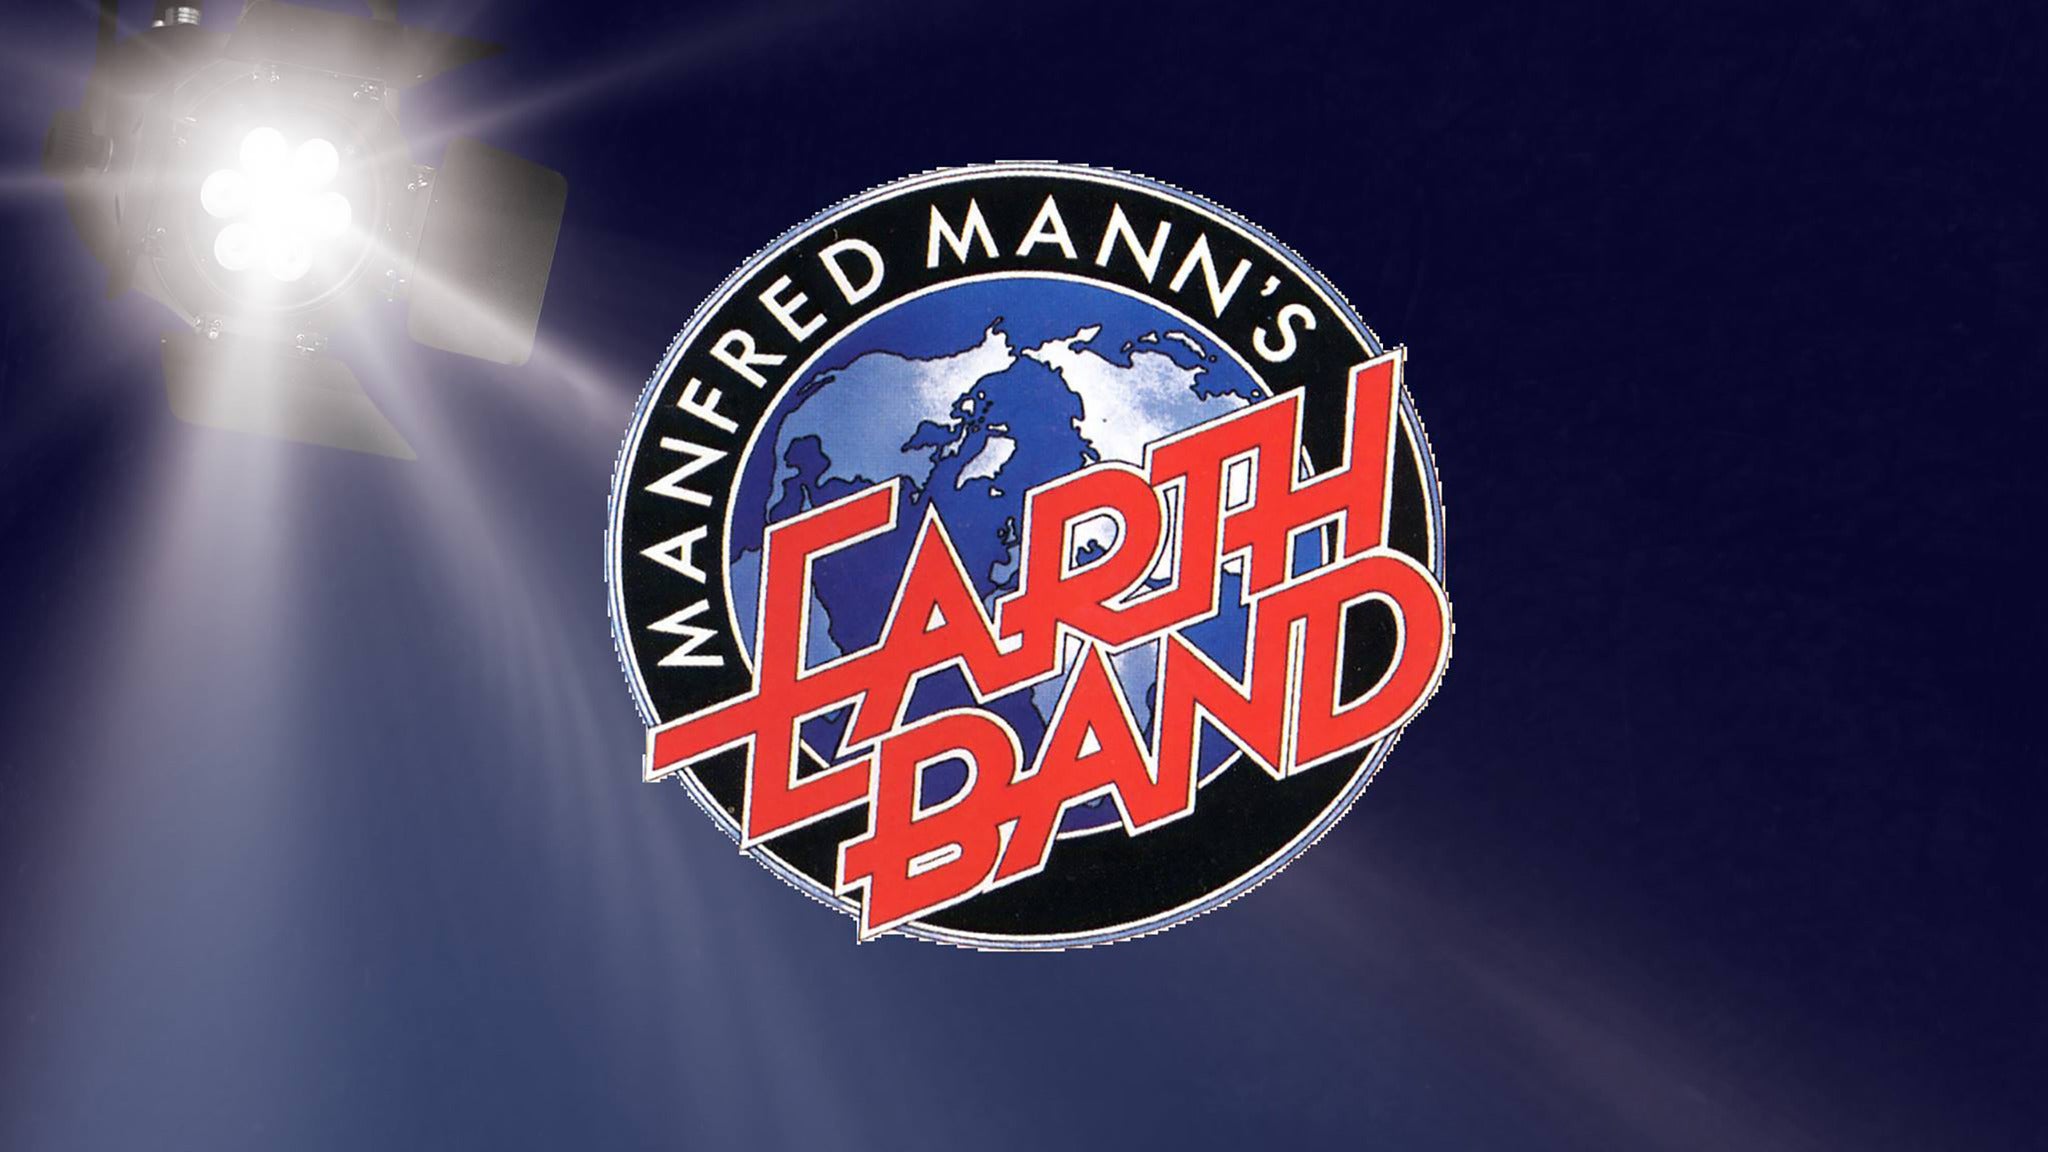 Manfred Mann S Earth Band Tickets Tour Dates 2020 Concerts